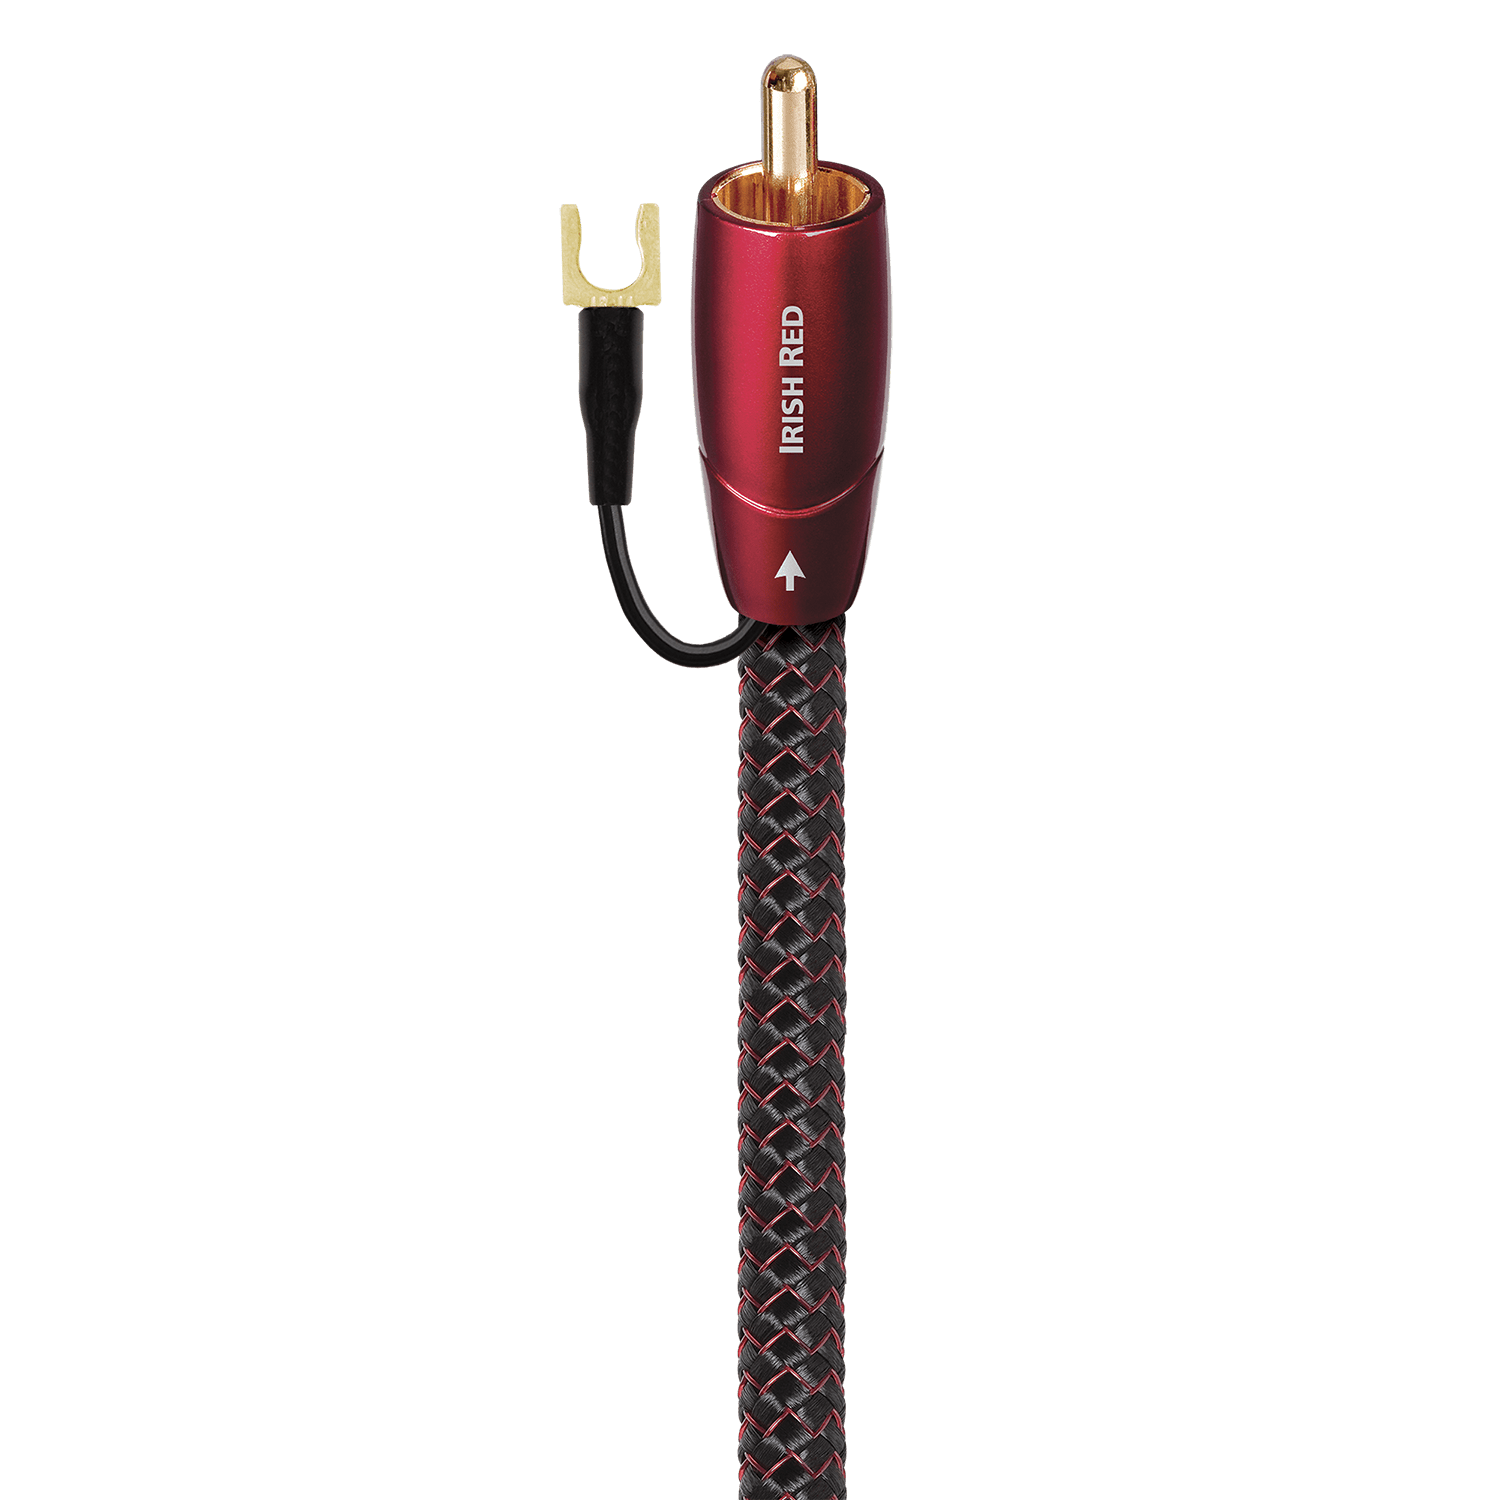 Irish Red RCA - IRED02-2 m = 6 ft 6 in